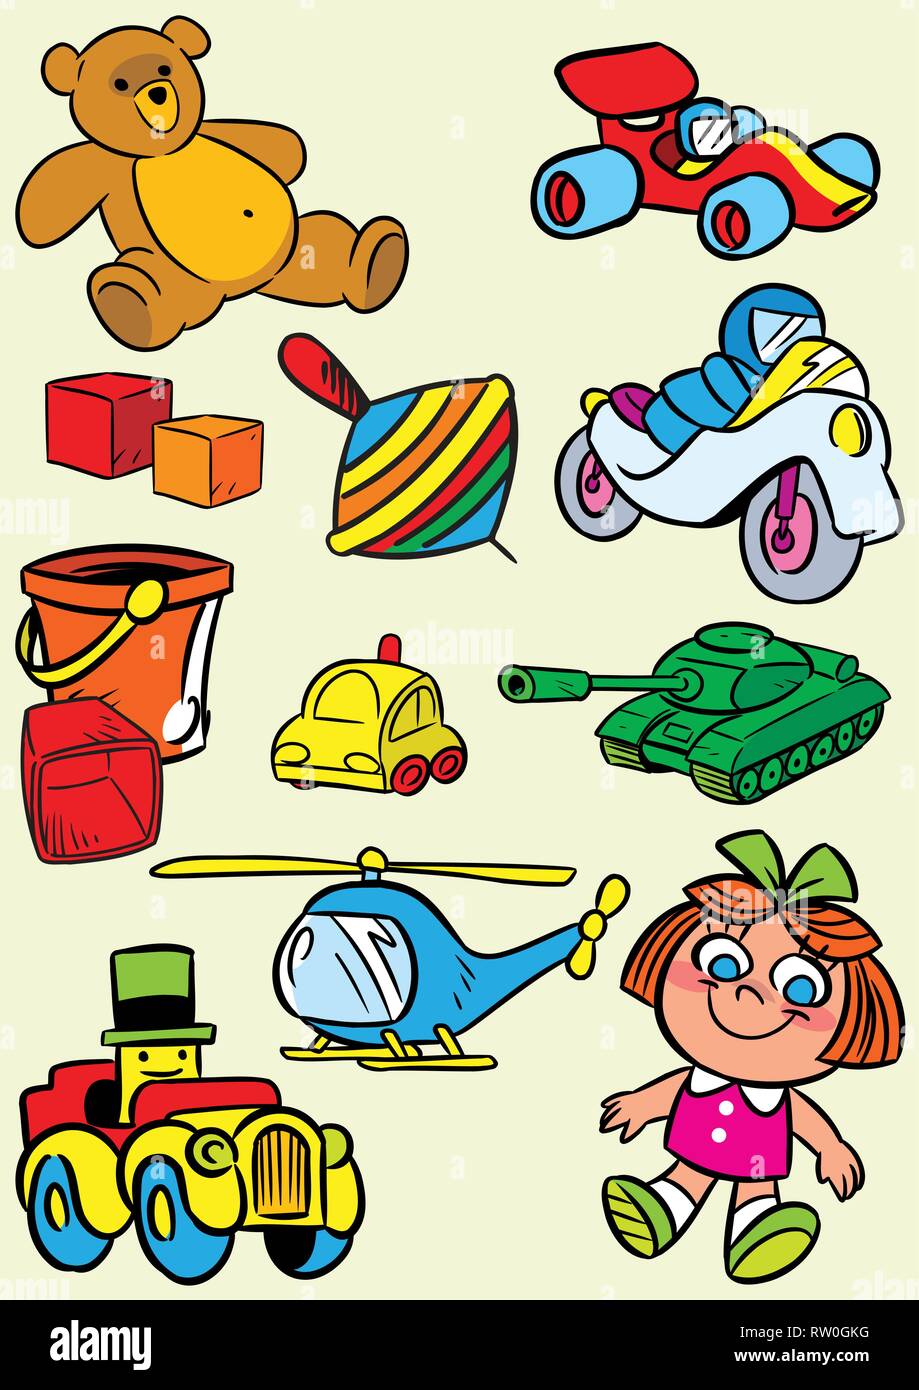 The illustration shows the big heap of colorful childrens toys. Illustration done in cartoon style. Stock Vector